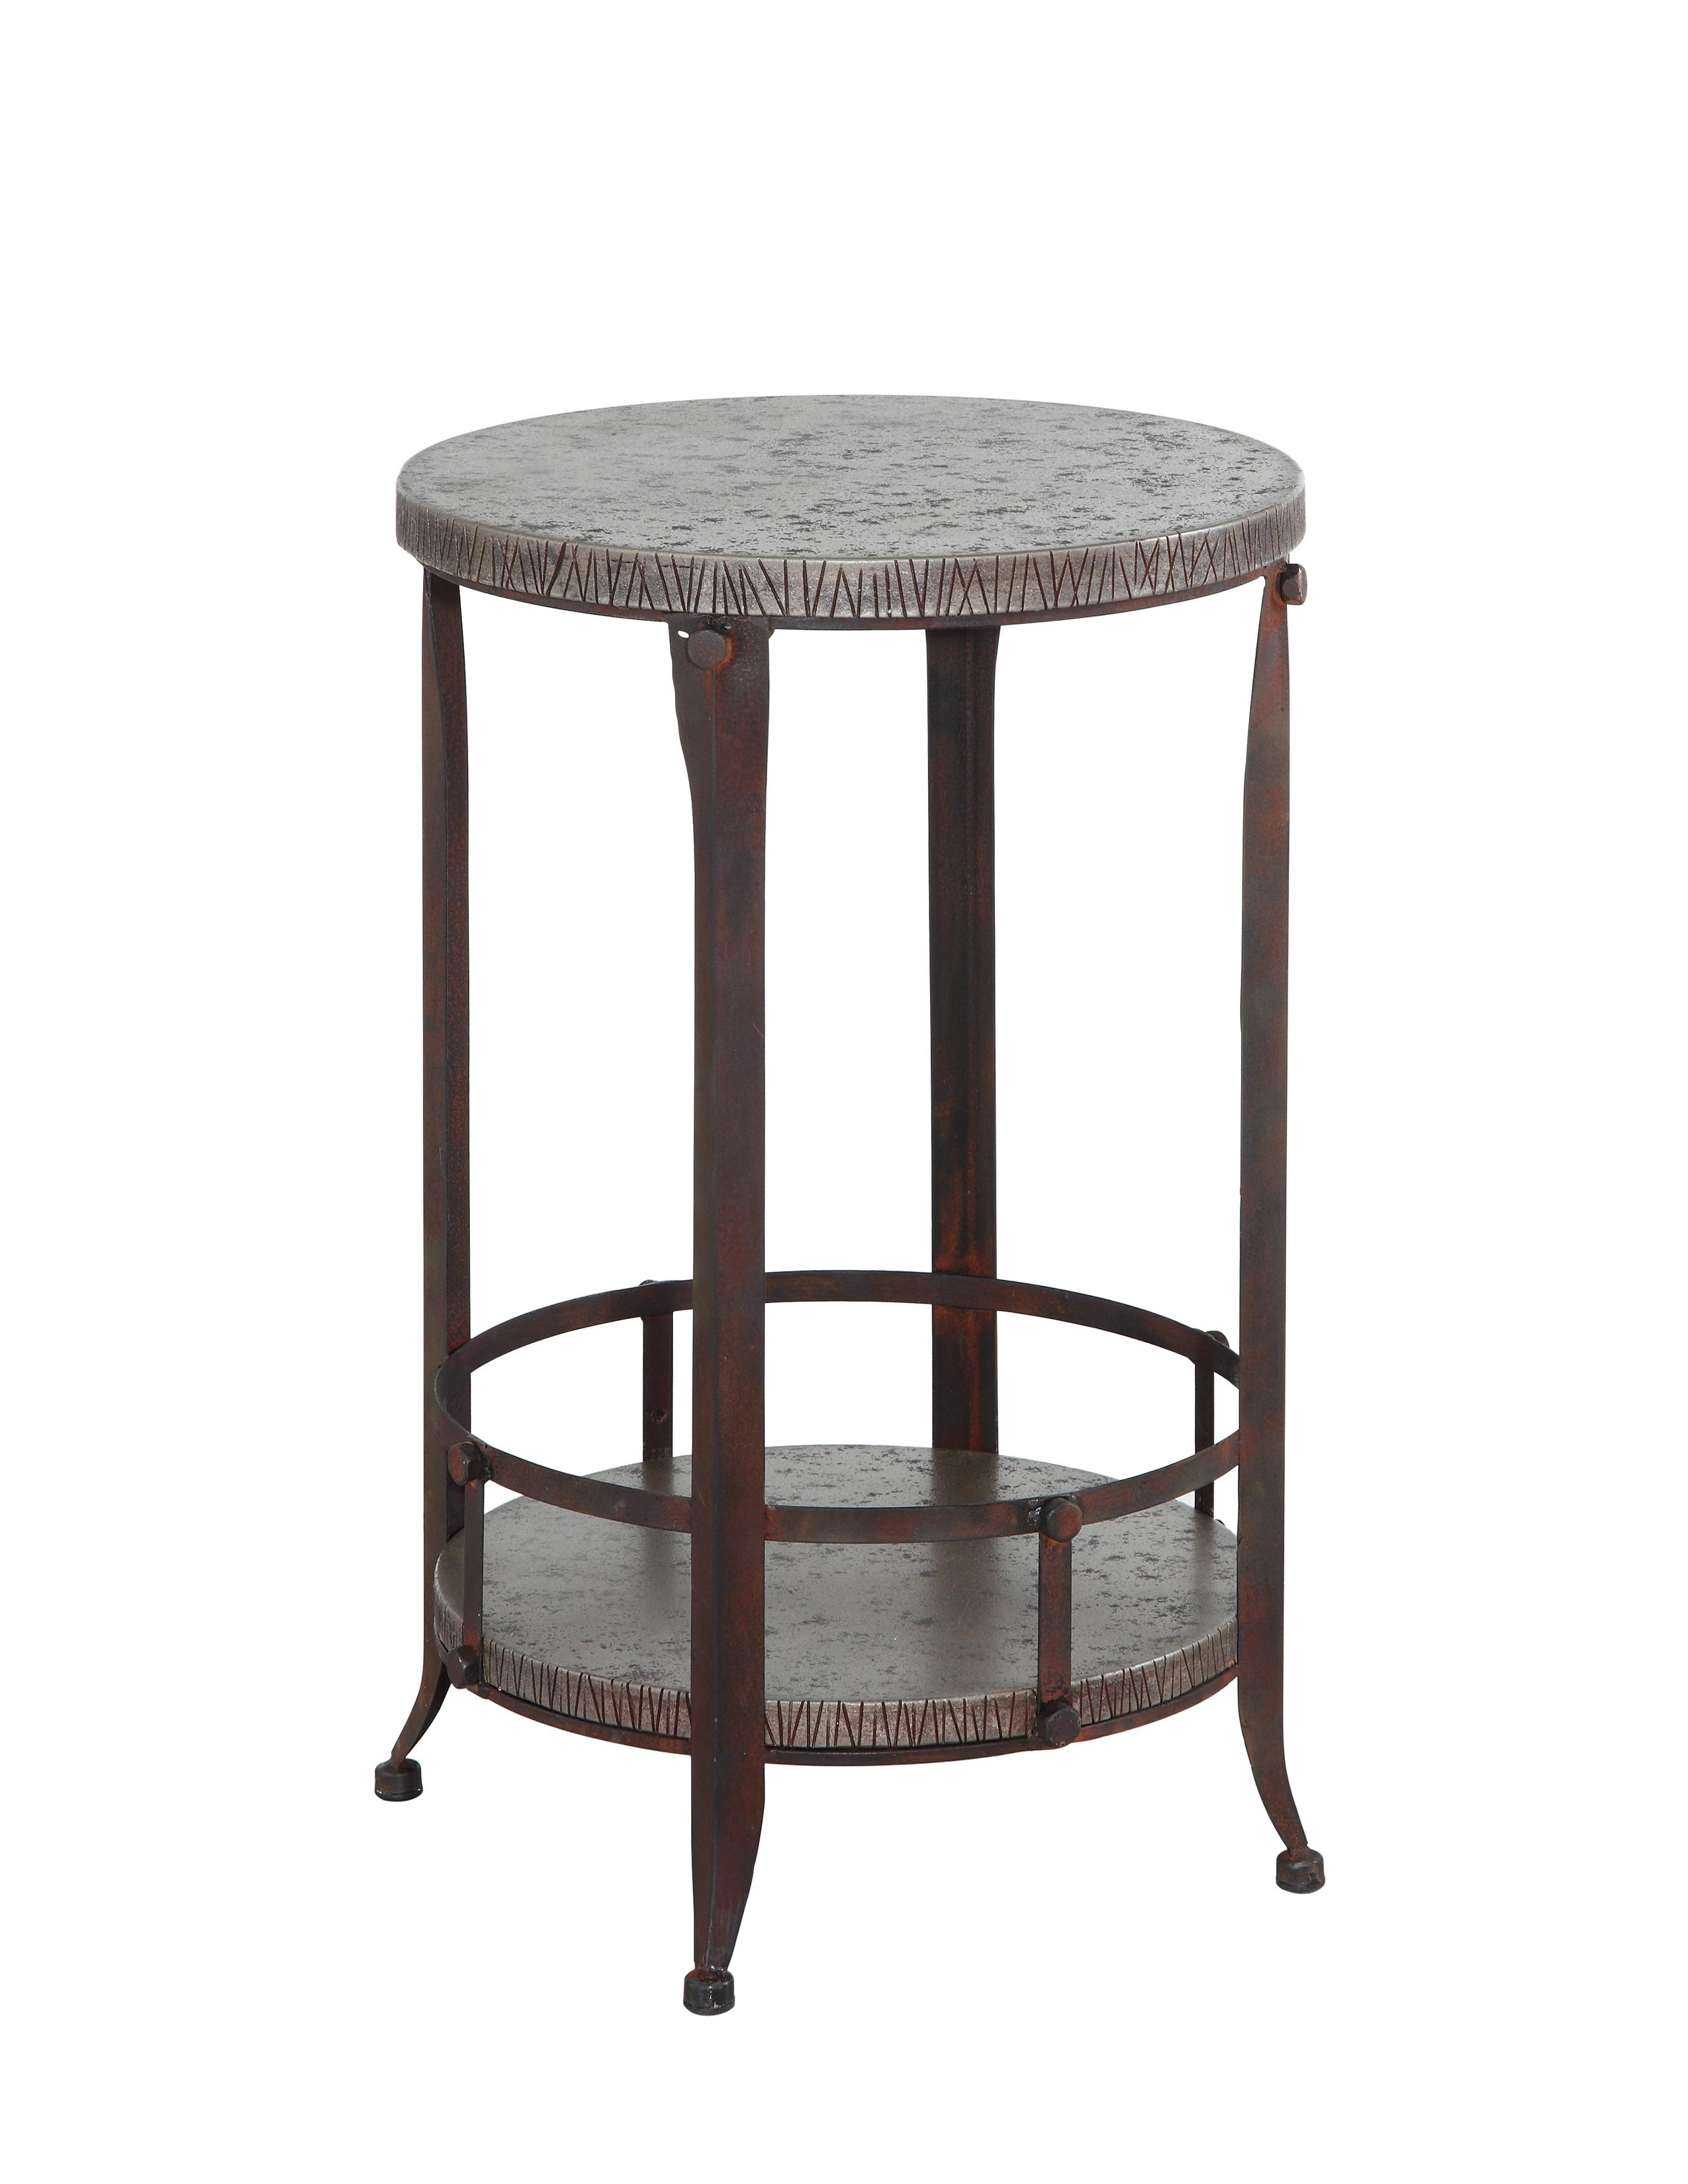 gray marble small round accent table using brown painted wrought focus for amazing iron tables the top reference metal unique patio umbrellas topper patterns conversation sets